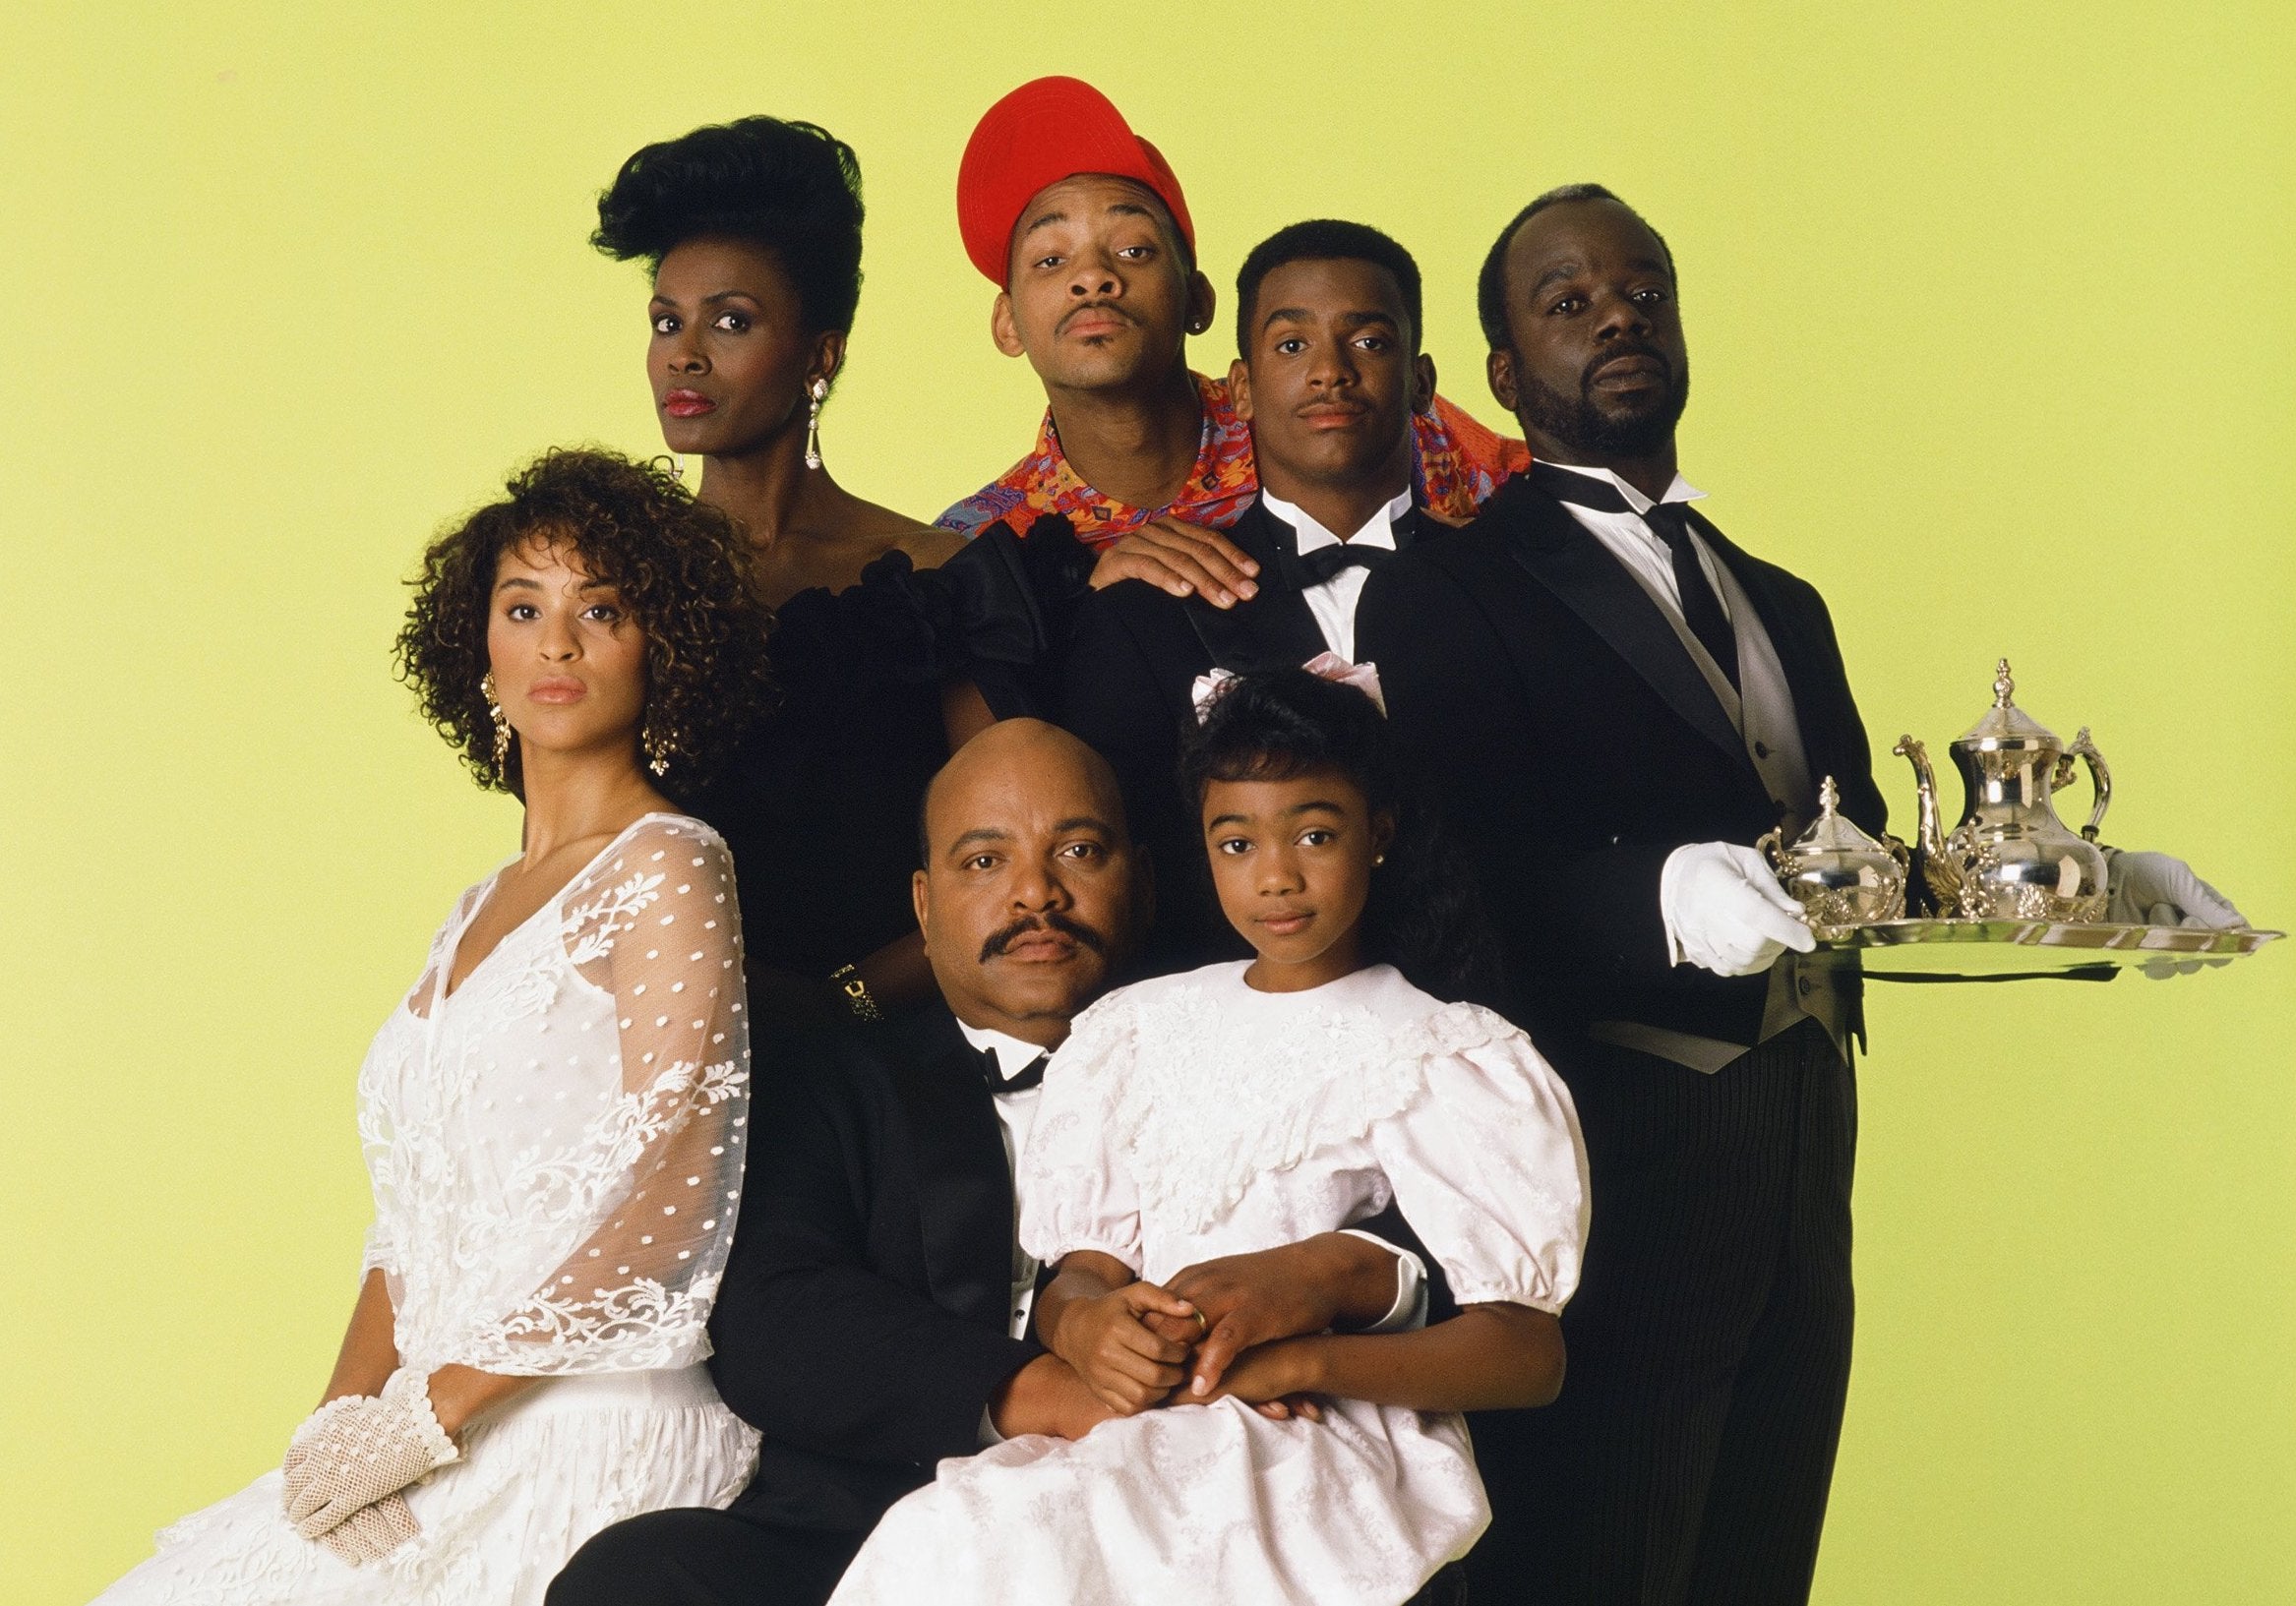 Meet the New Banks Family! 'Bel-Air' Cast Announced as Production gets Underway at Peacock